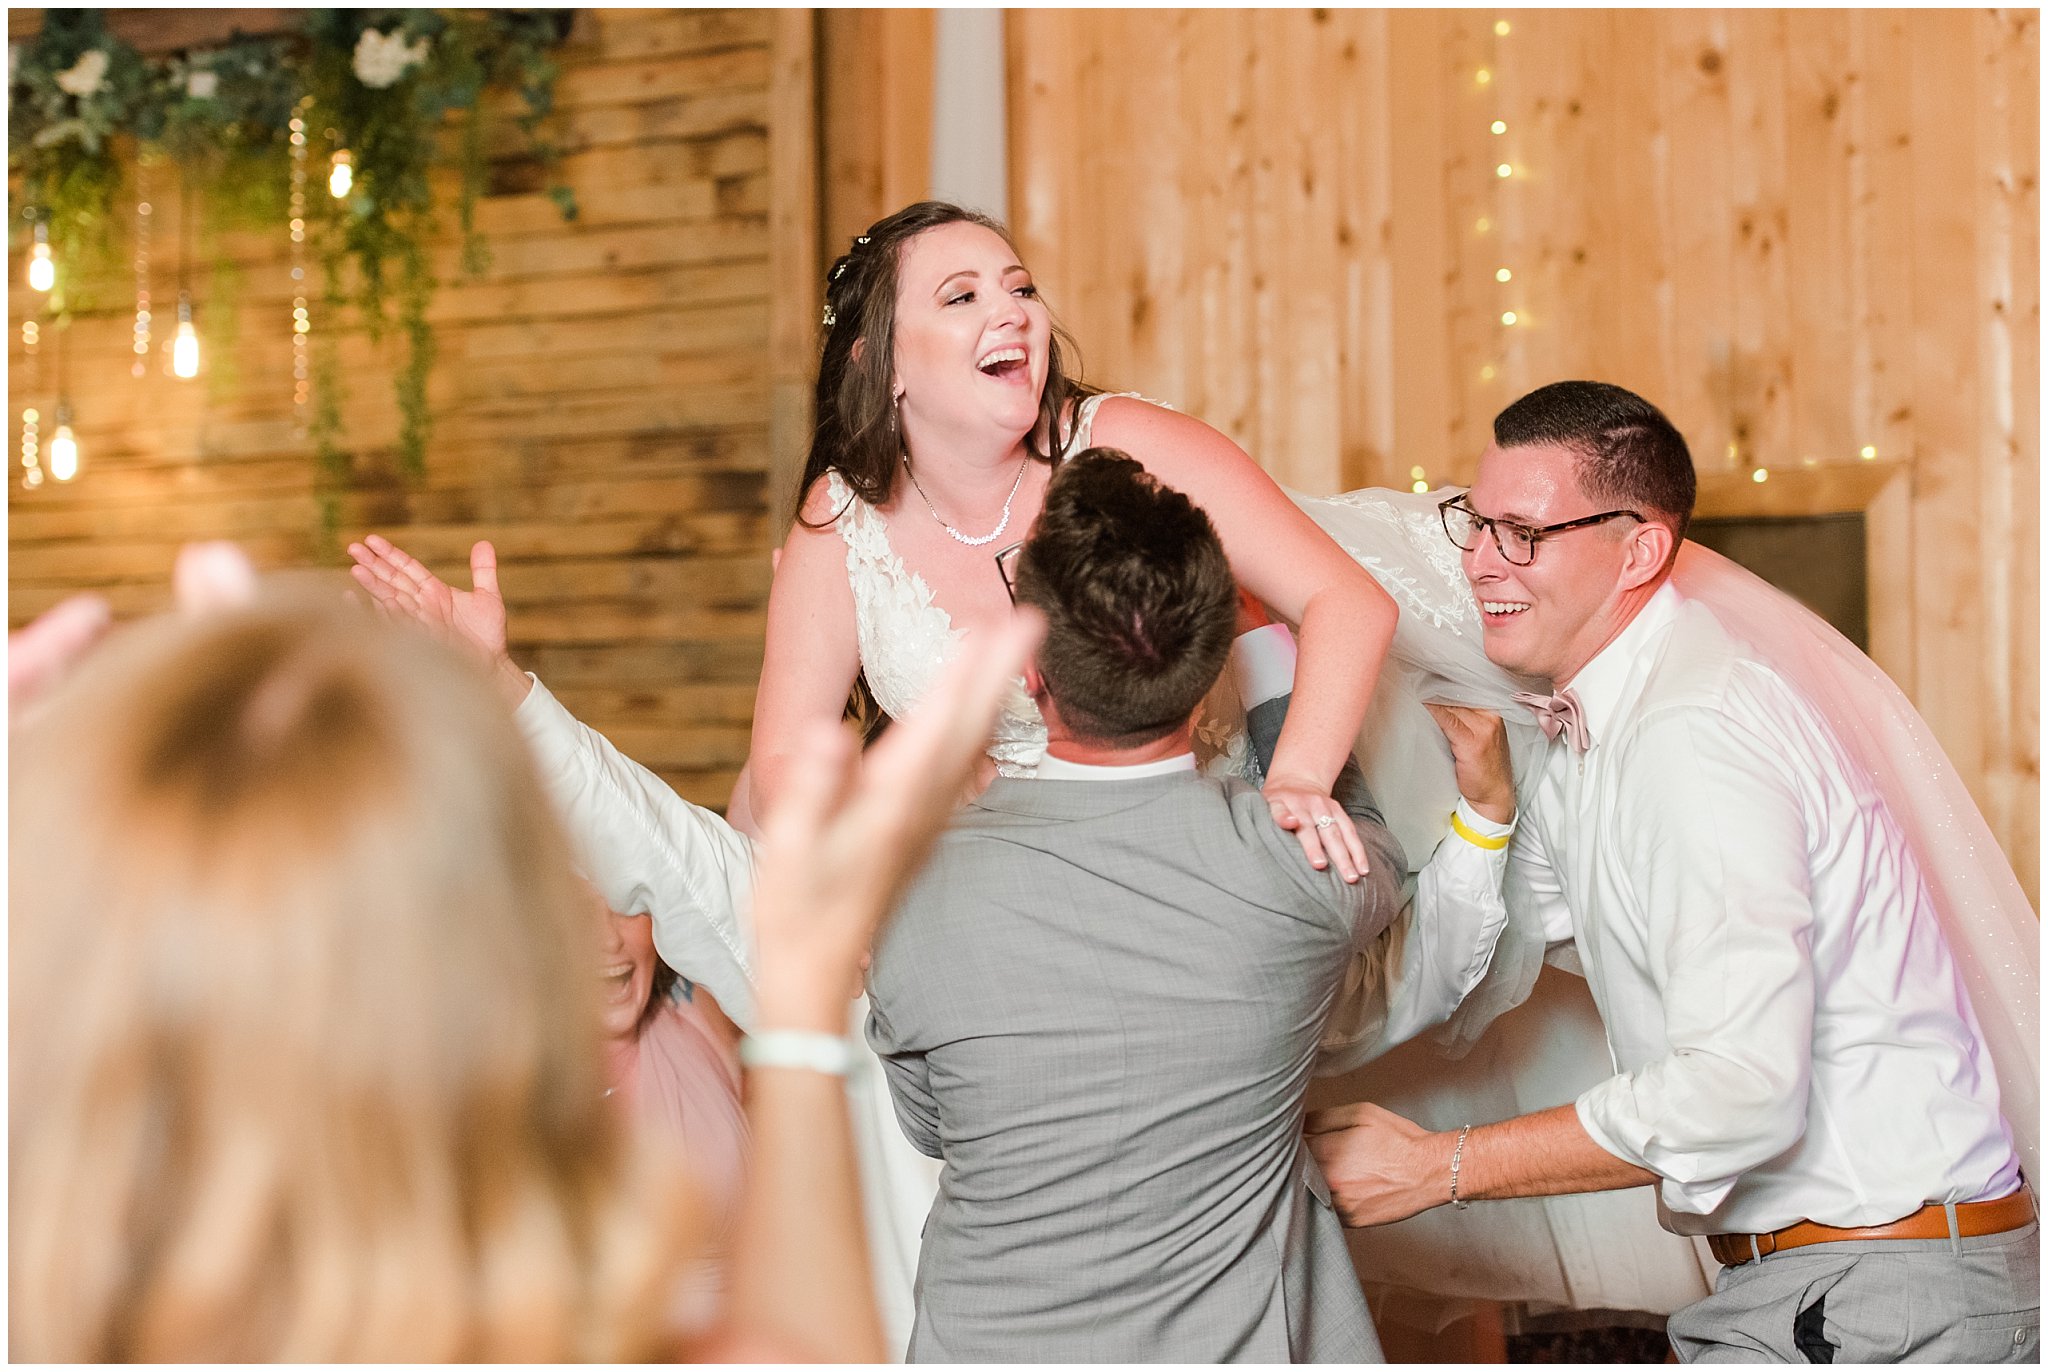 Party Dancing with bride lifted up | Oak Hills Utah Dusty Rose and Gray Summer Wedding | Jessie and Dallin Photography